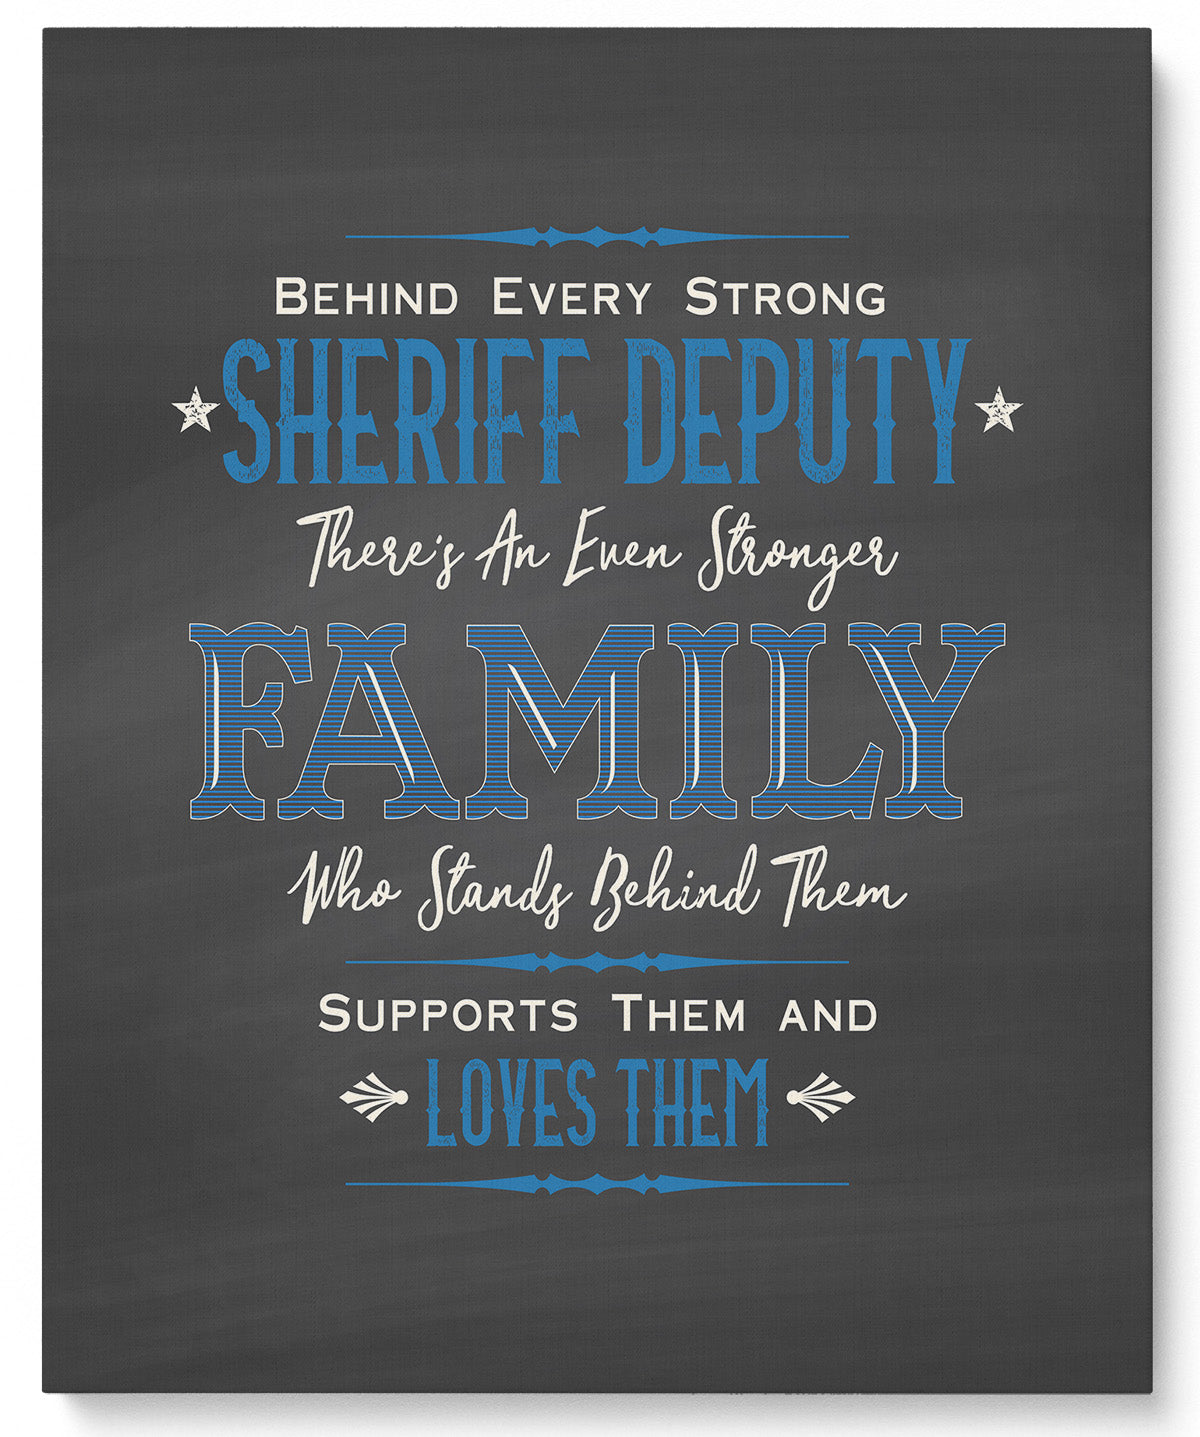 Behind Every Strong Sheriff - Law Enforcement Prints - Police Officer Gifts from Family - Police Hero Gift - Police Officer Wall Decor - Family Wall Art Gift to Sheriff